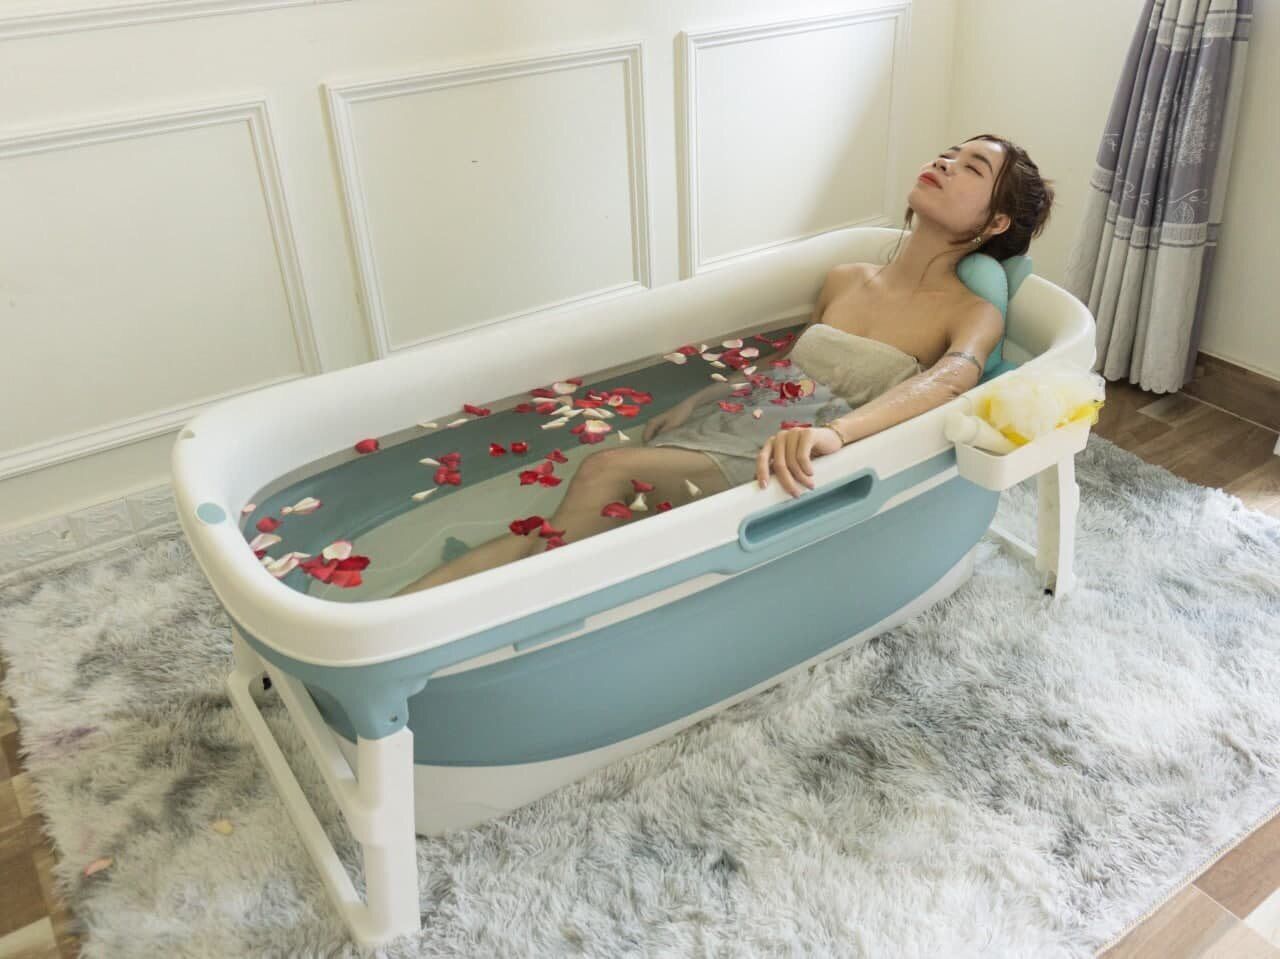 6 bargain items to help chill the bathroom like a spa from only 35,000 VND - 1